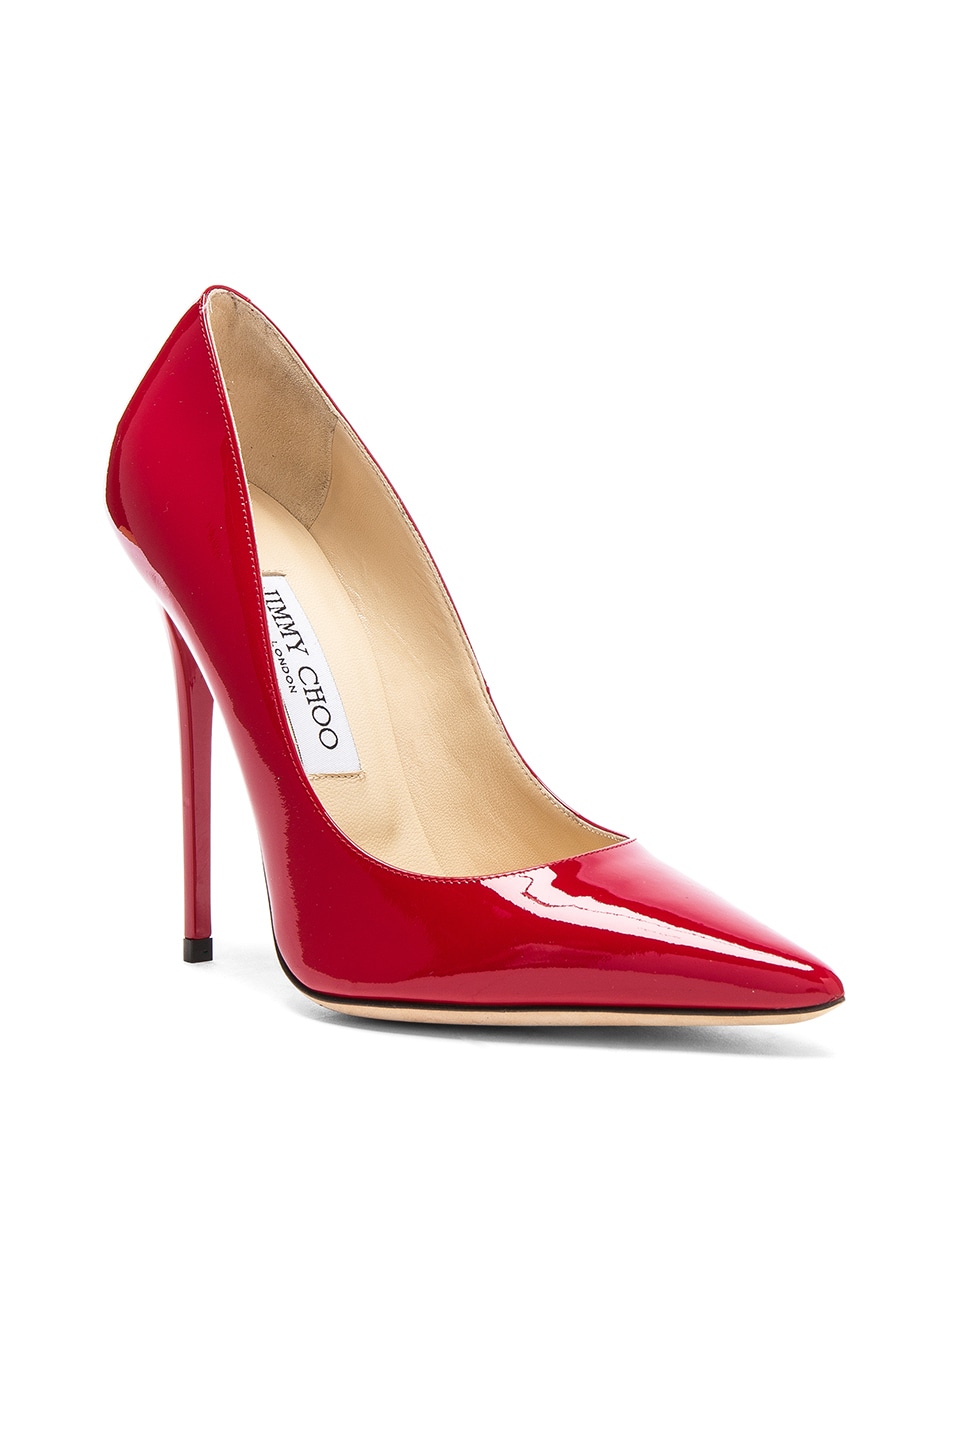 Jimmy Choo Anouk 120 Patent Leather Pump in Red | FWRD